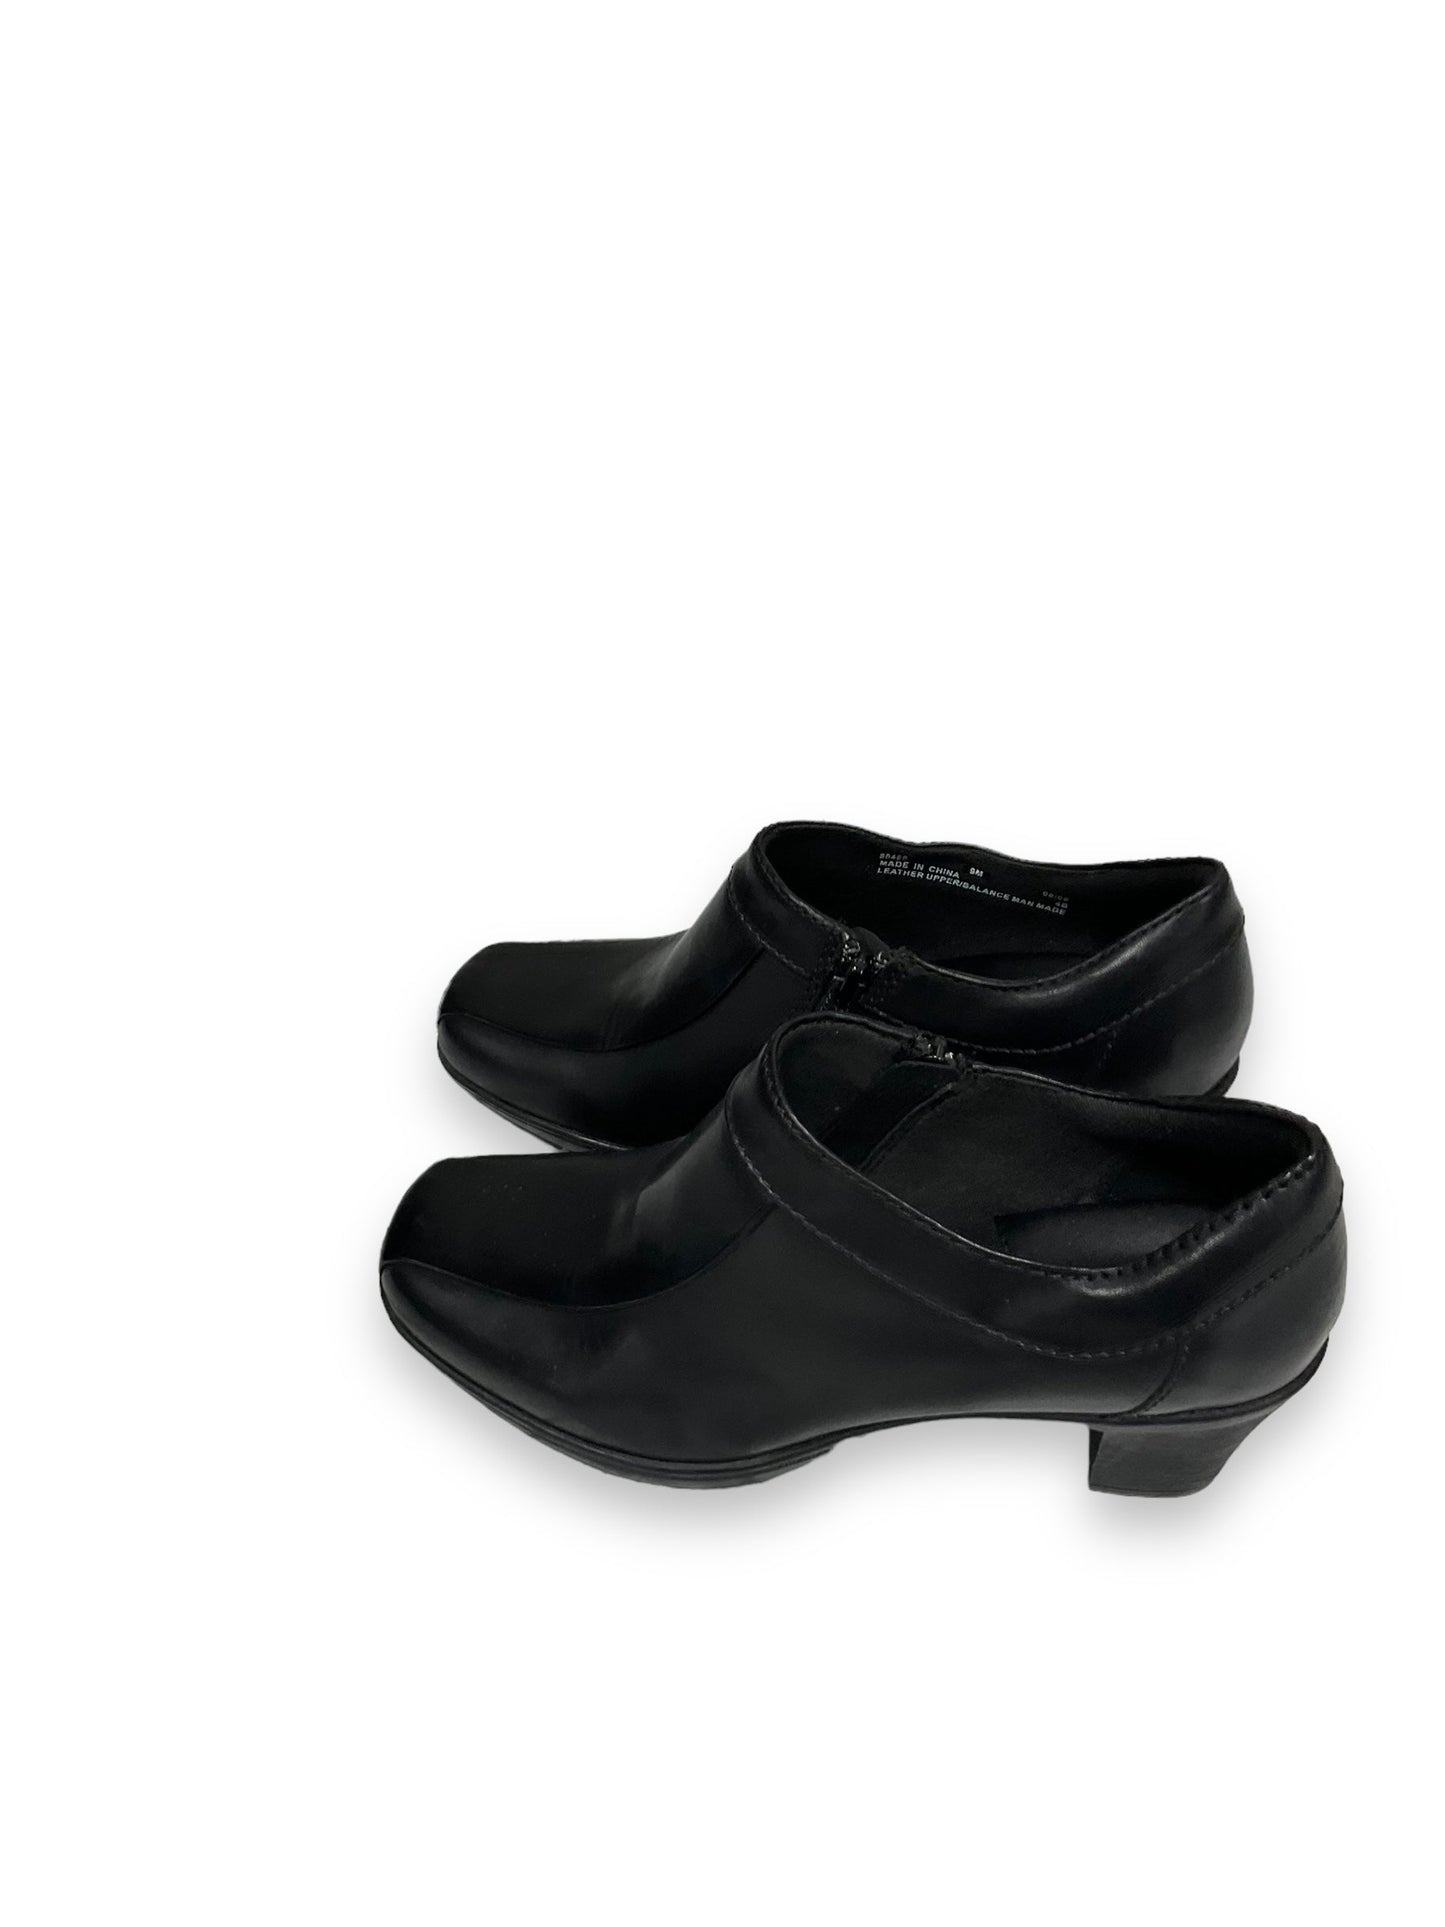 Shoes Heels Block By Clarks  Size: 9